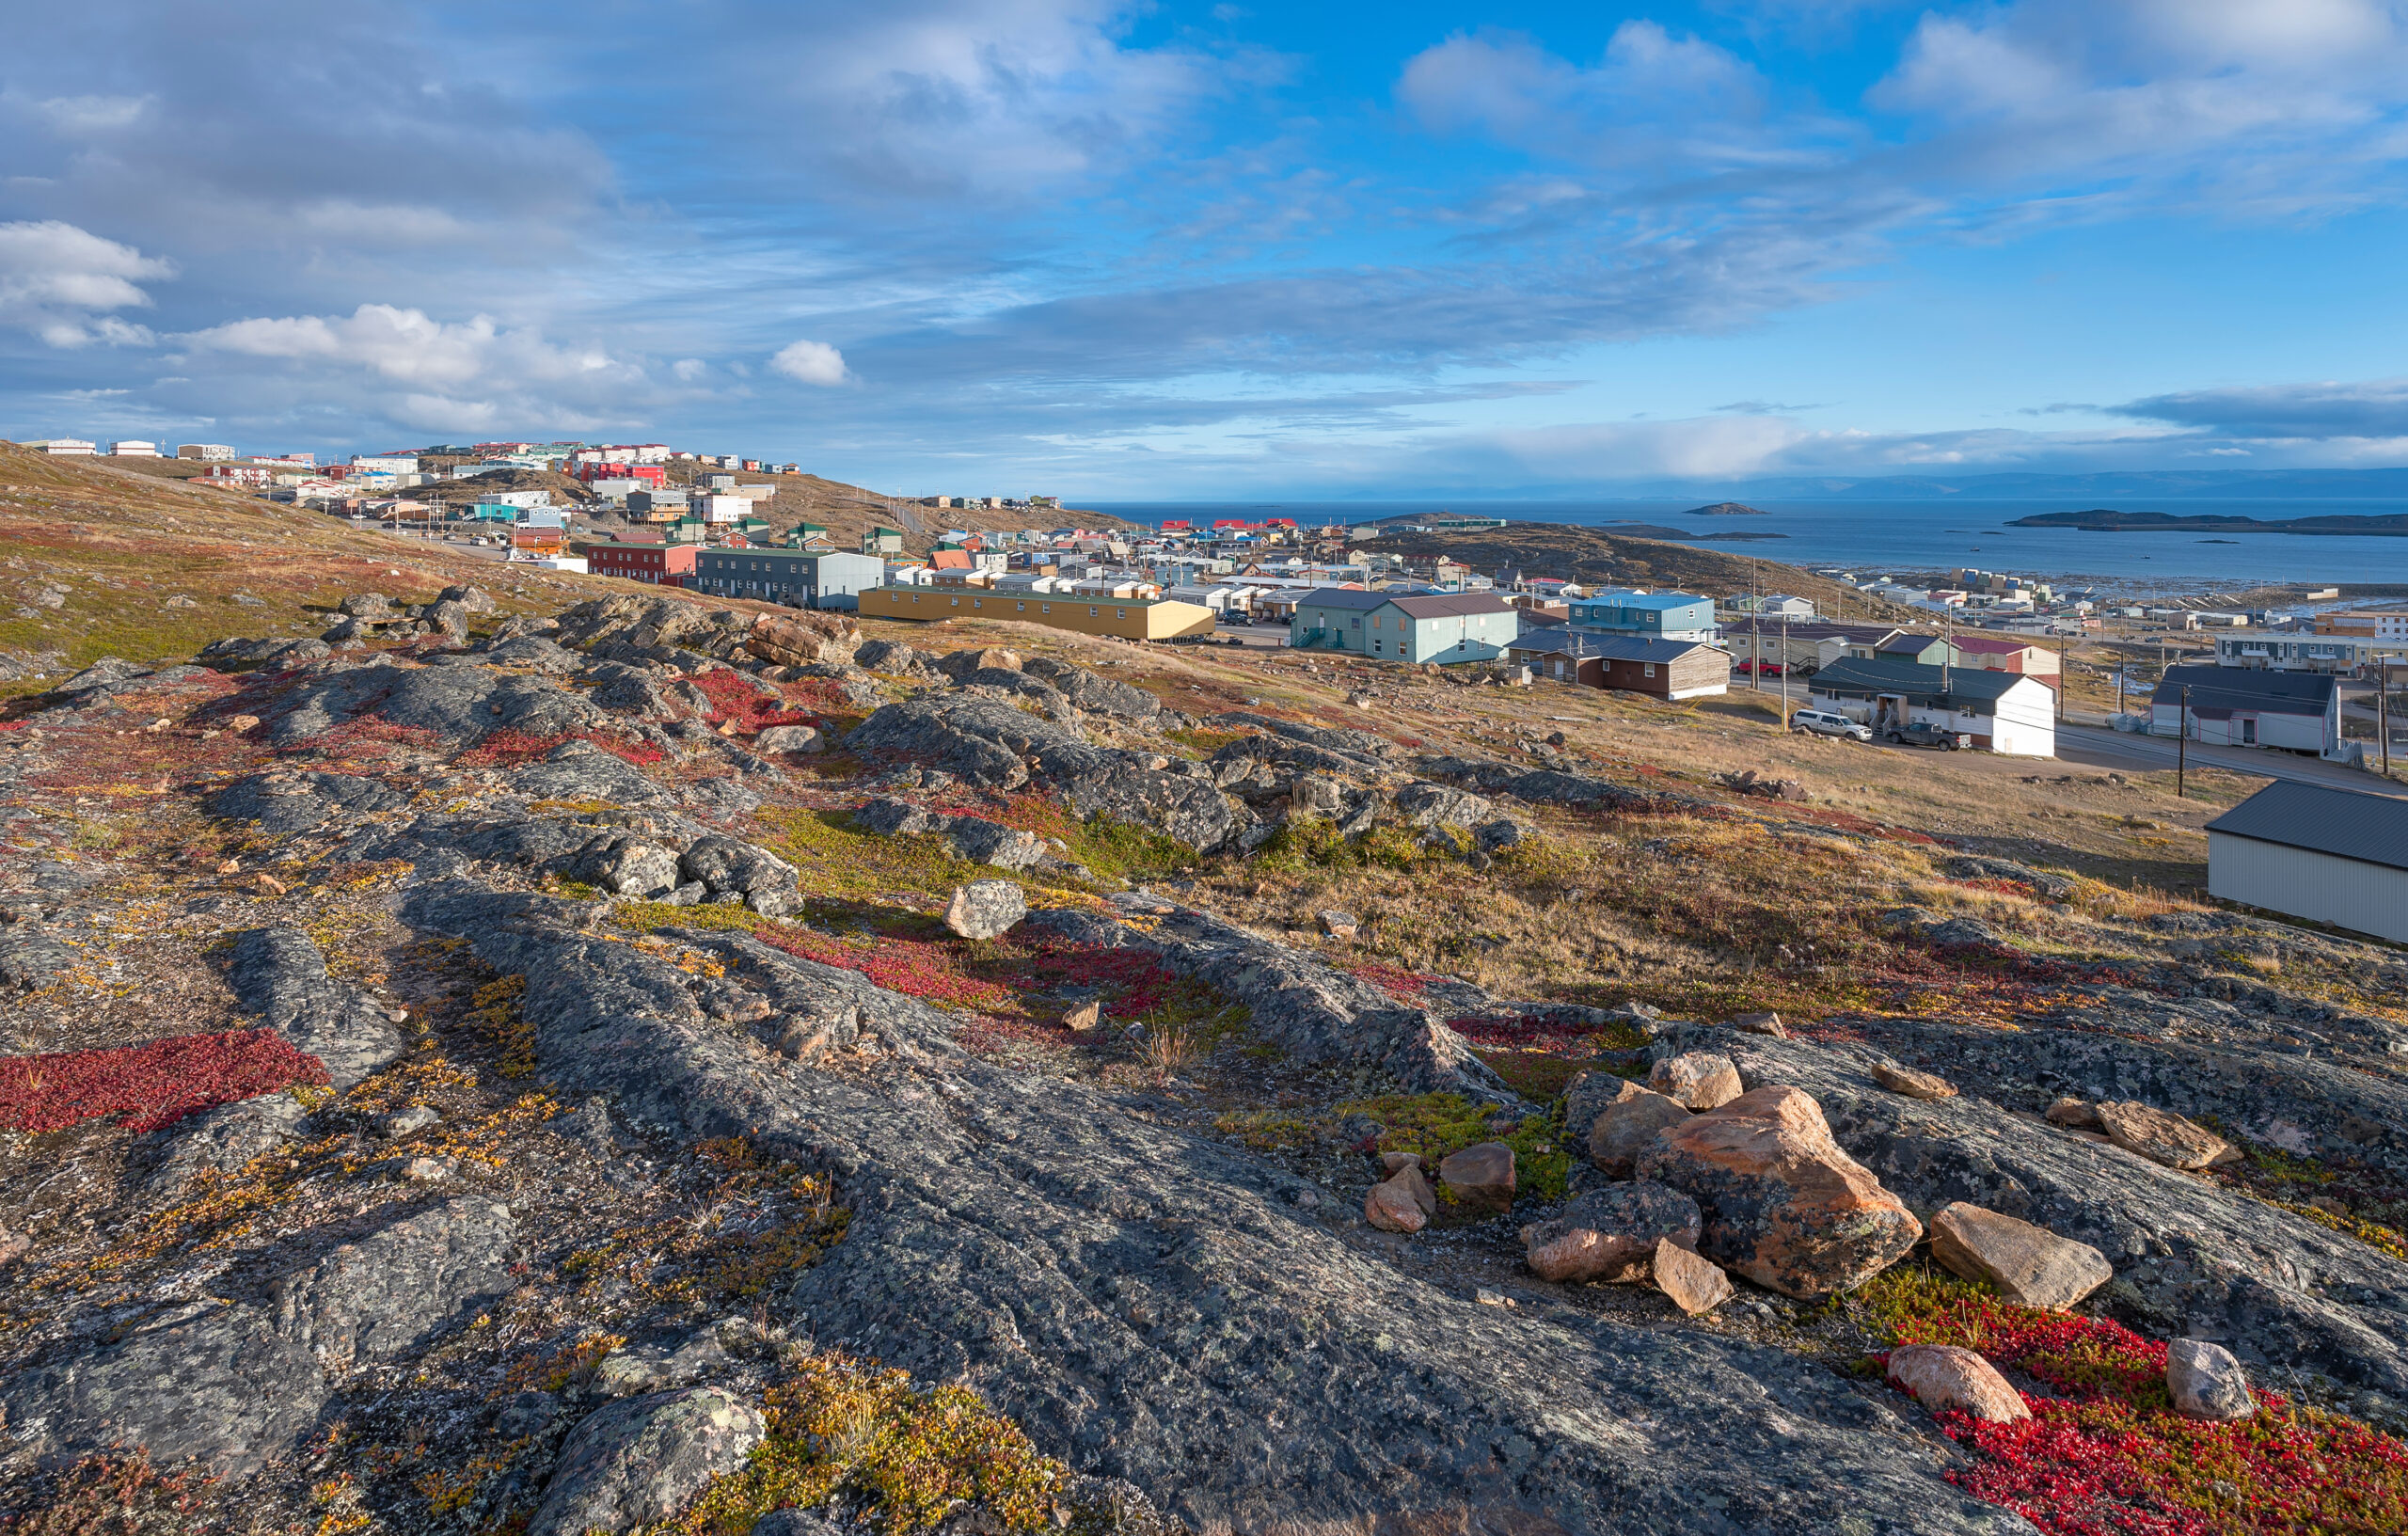 Overview of the colourful houses of the city of Iqaluit with the Arctic Ocean harbour in the distance